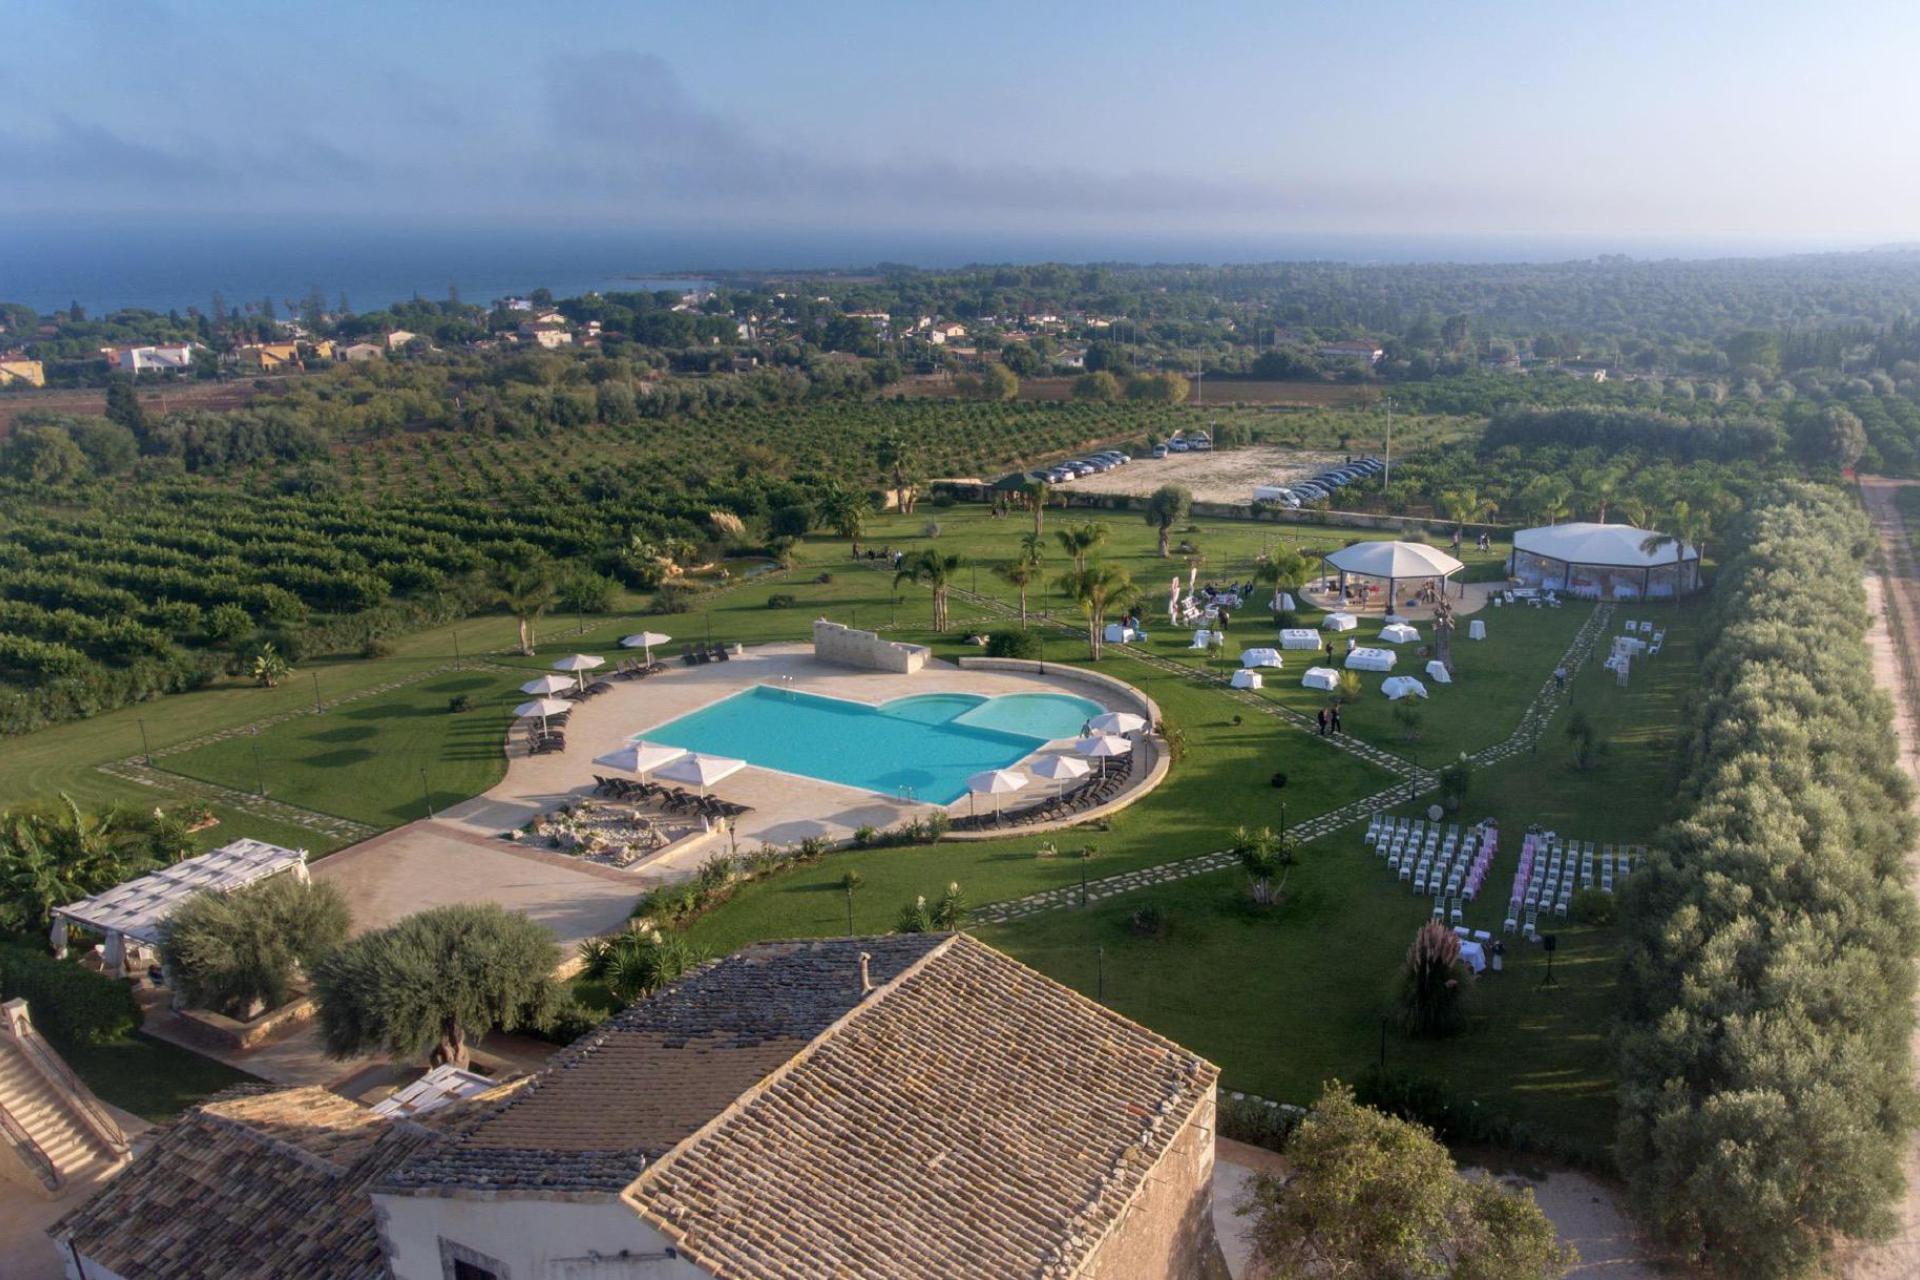 Agriturismo Sicily Agriturismo with large pool near beach